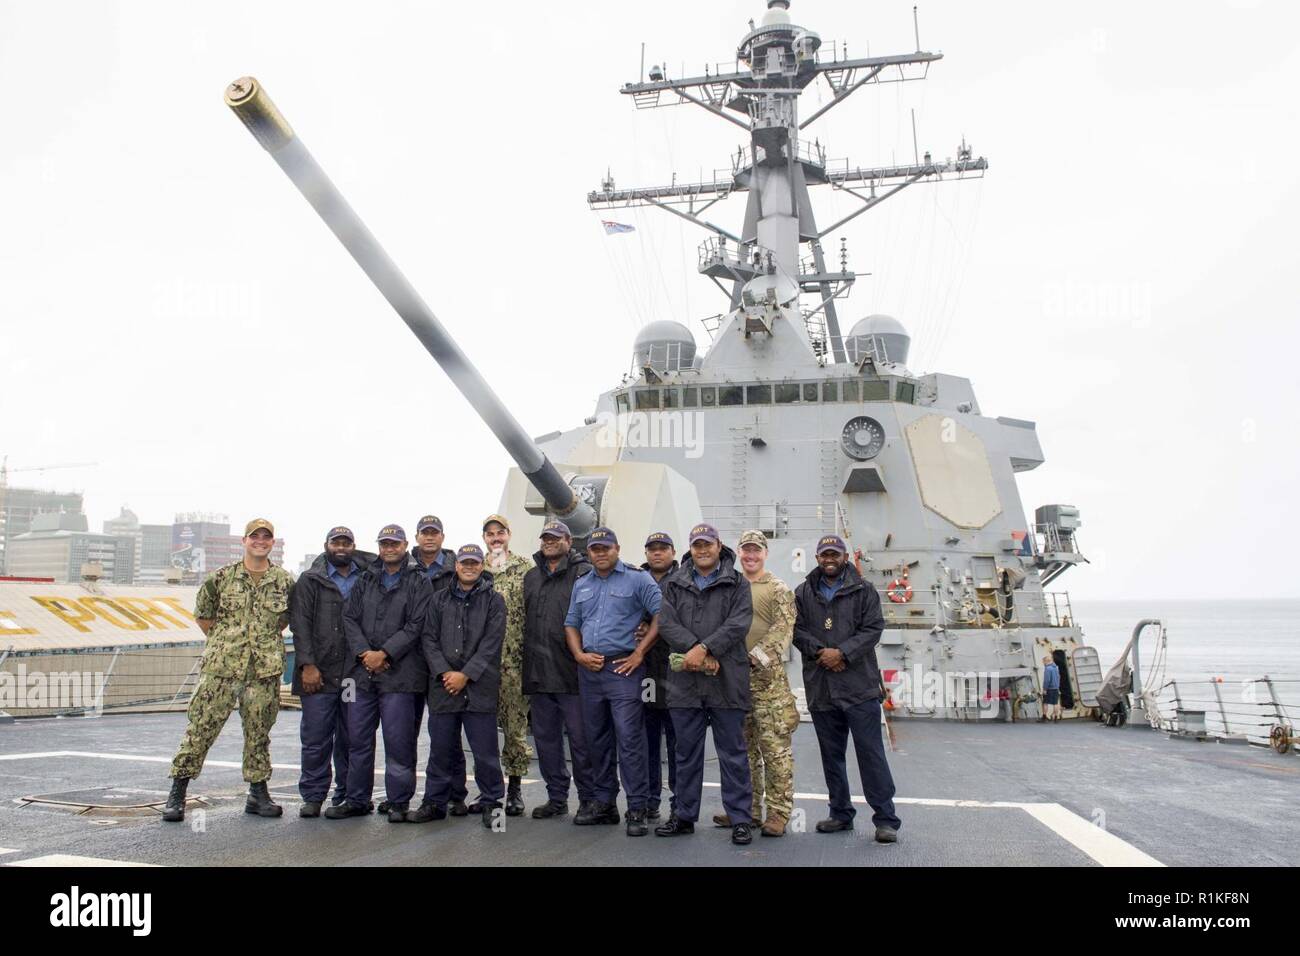 PORT OF SUVA, Fiji (Oct. 16, 2018) Sailors and Coast Guardsman, assigned to the Arleigh Burke-class guided-missile destroyer USS Shoup (DDG 86), pose for a photo with sailors of the Republic of Fiji Military Forces after a symposium during a recent port visit in Suva, Fiji Oct. 16, 2018. Shoup is currently participating in the Oceania Maritime Security Initiative (OMSI) program, a Secretary of Defense program leveraging Department of Defense assets transiting the region to increase the Coast Guard’s maritime domain awareness, ultimately supporting its maritime law enforcement operations in Oce Stock Photo